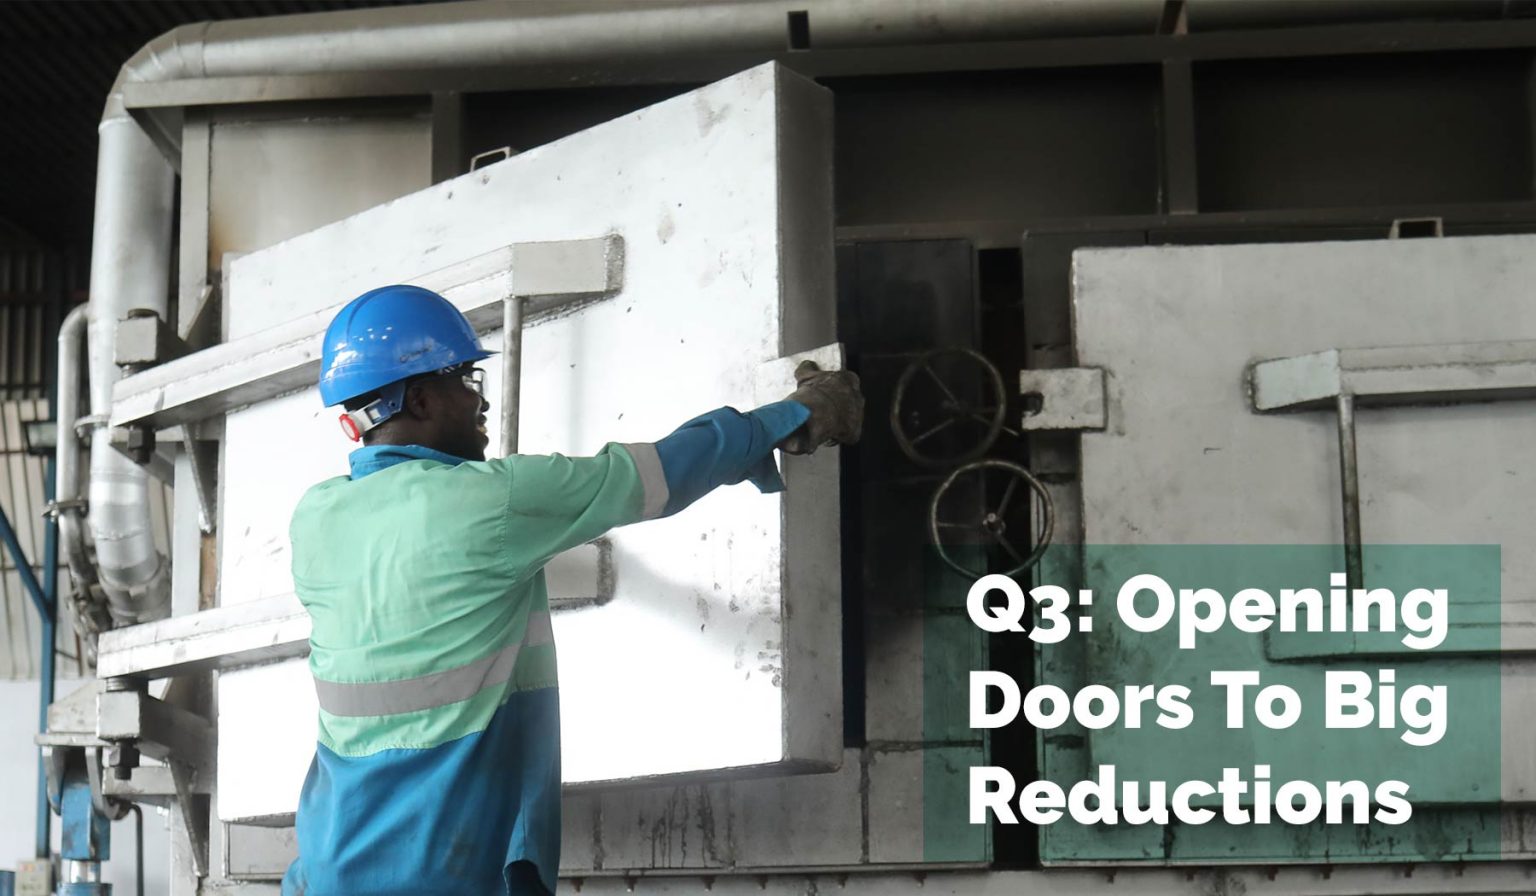 Opening Doors To Big Reductions – Q3, 2020 Results Show